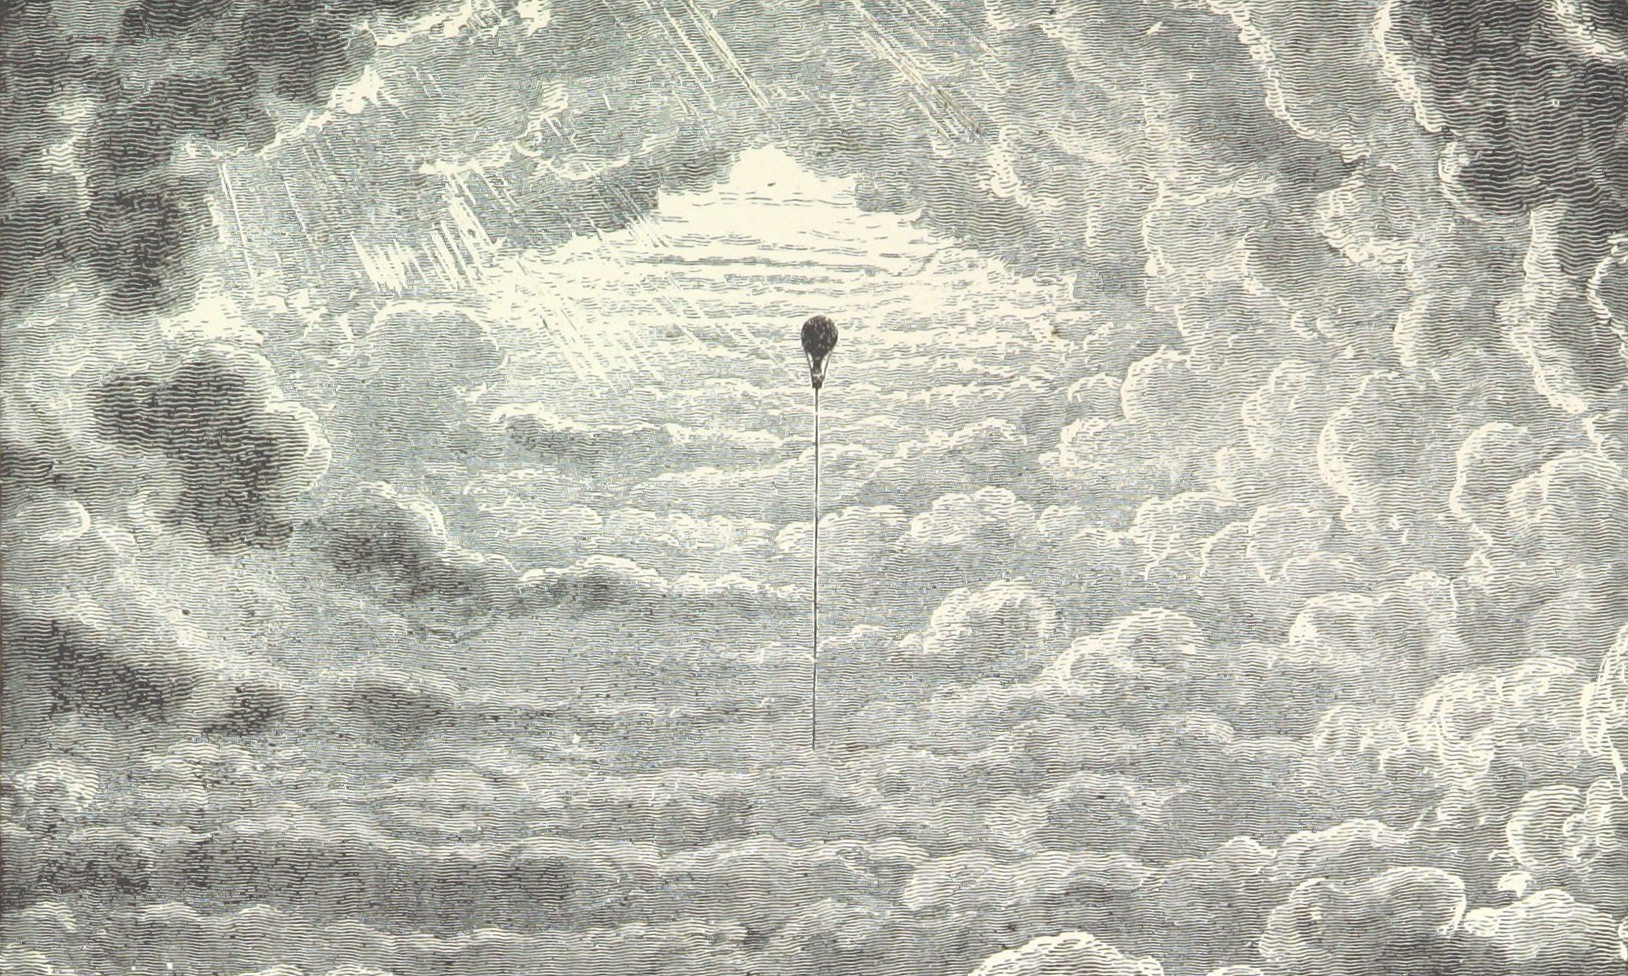 A balloon floating up into the clouds